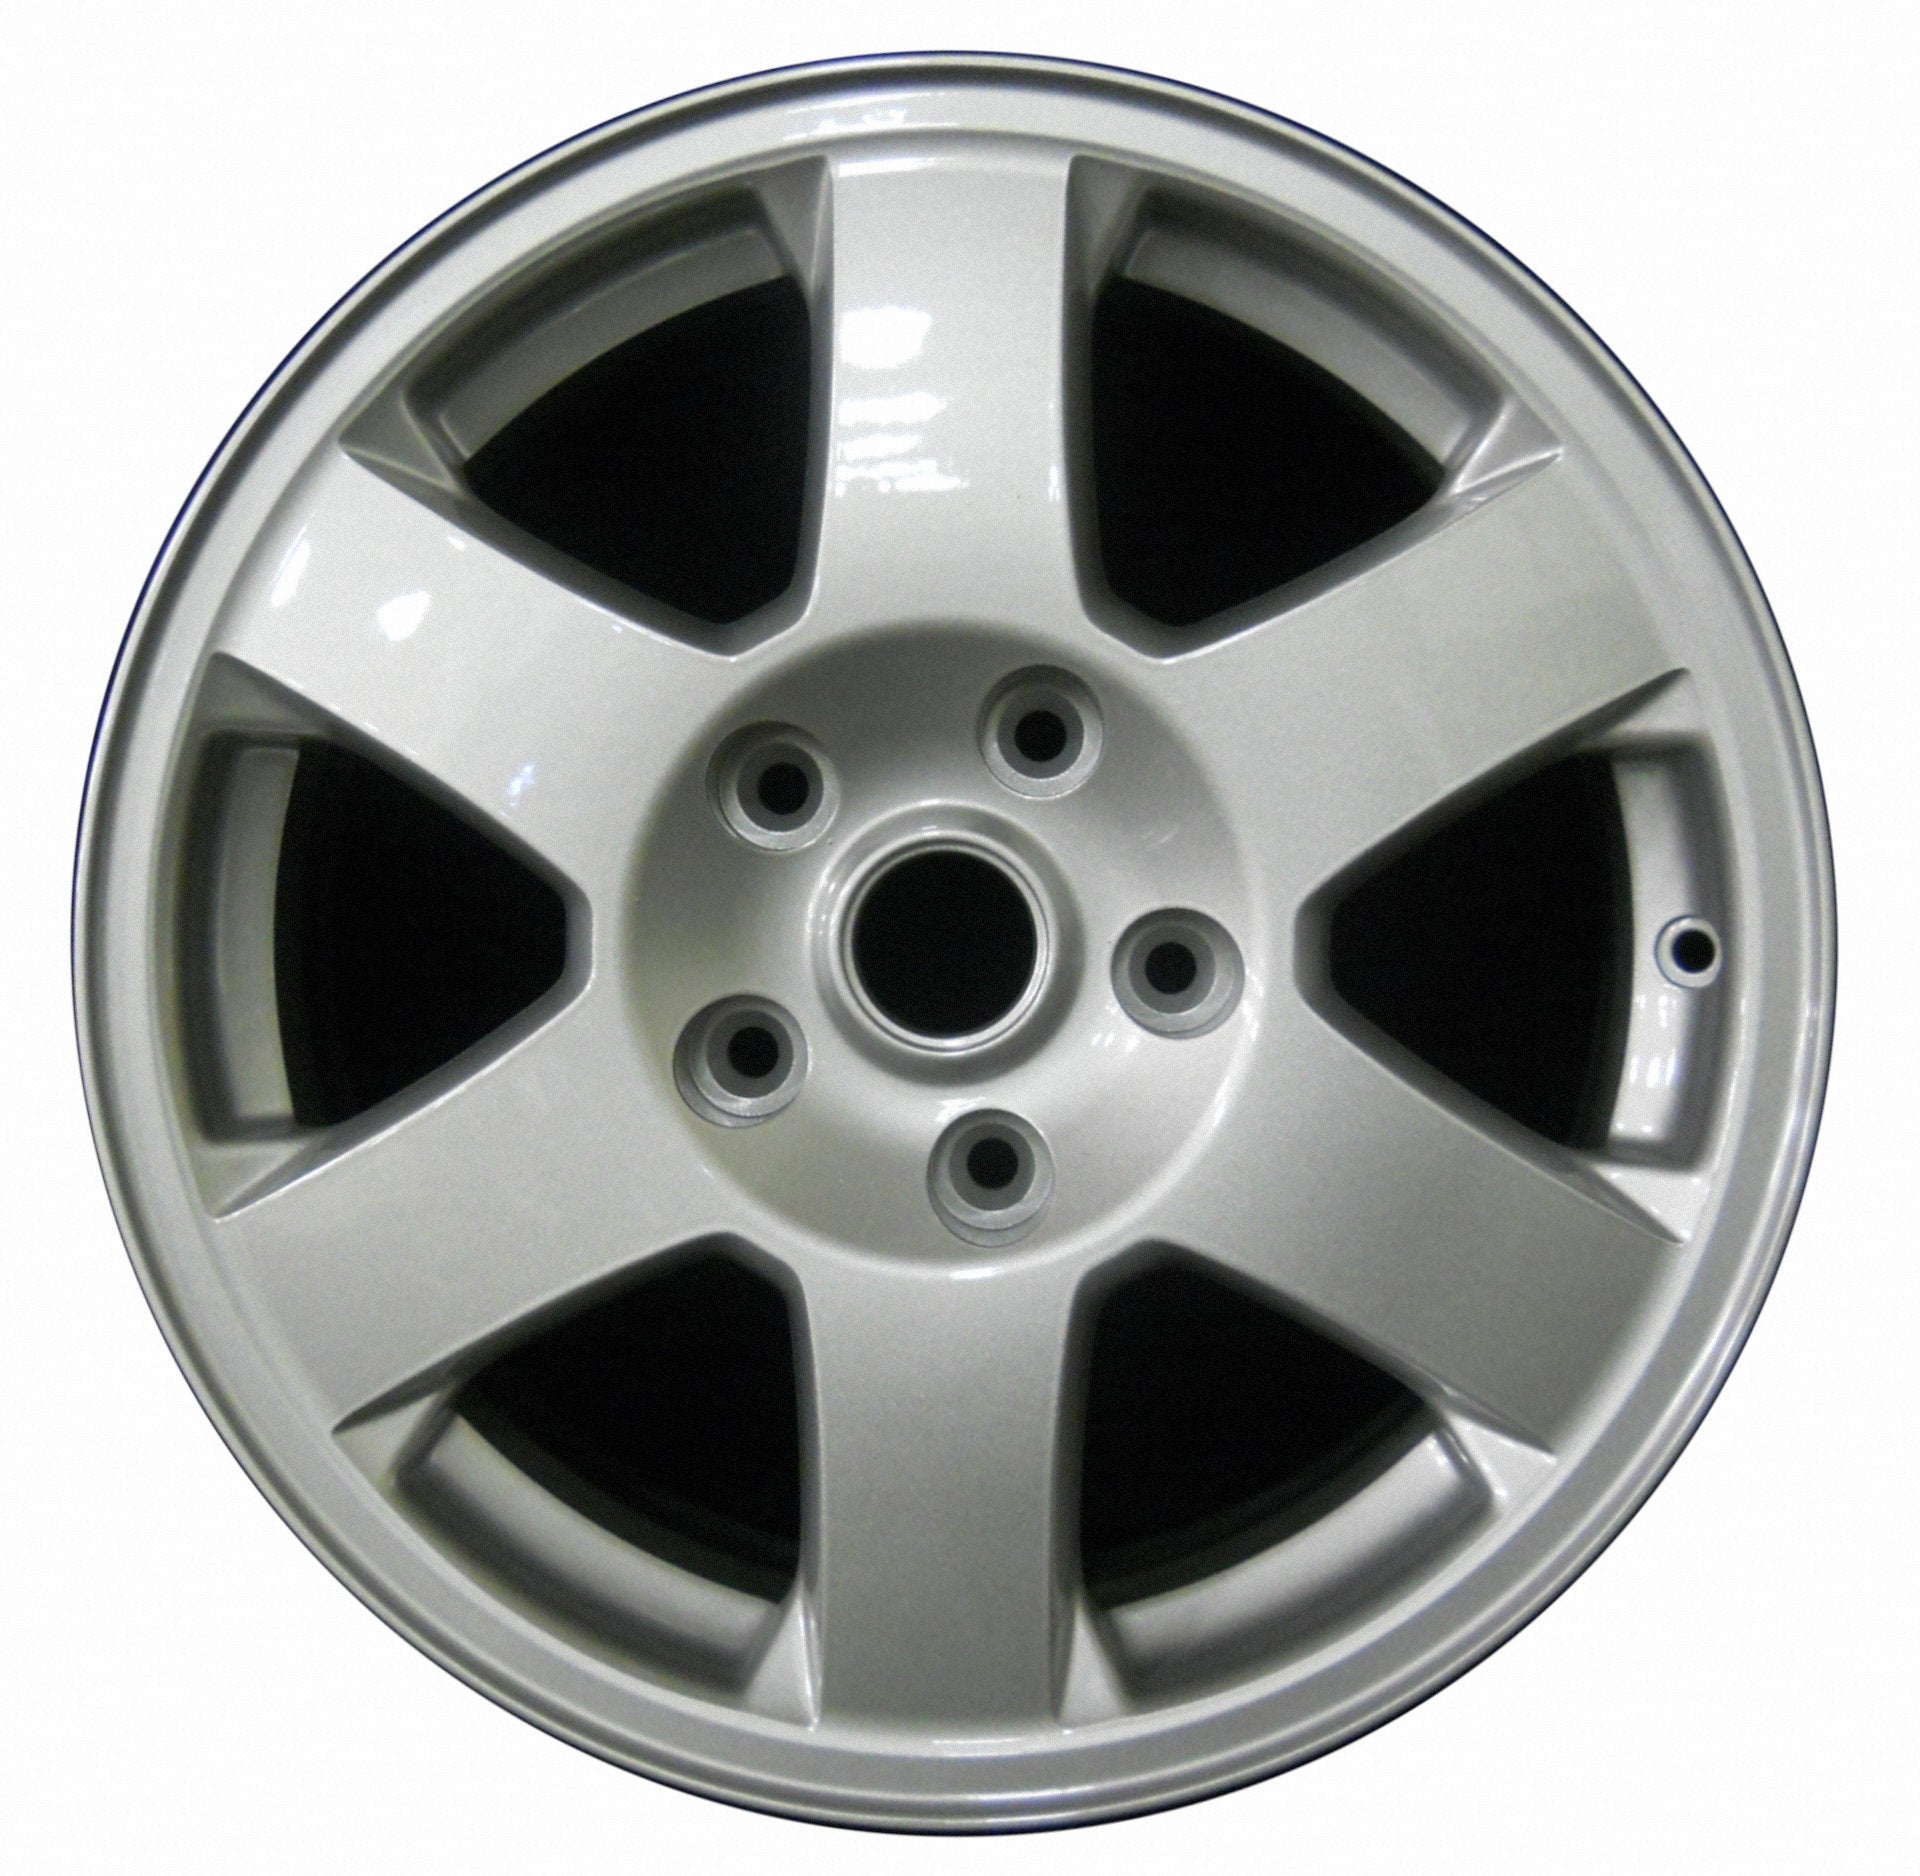 Jeep Grand Cherokee  2008, 2009, 2010, 2011 Factory OEM Car Wheel Size 17x7.5 Alloy WAO.9079.PS13.FF